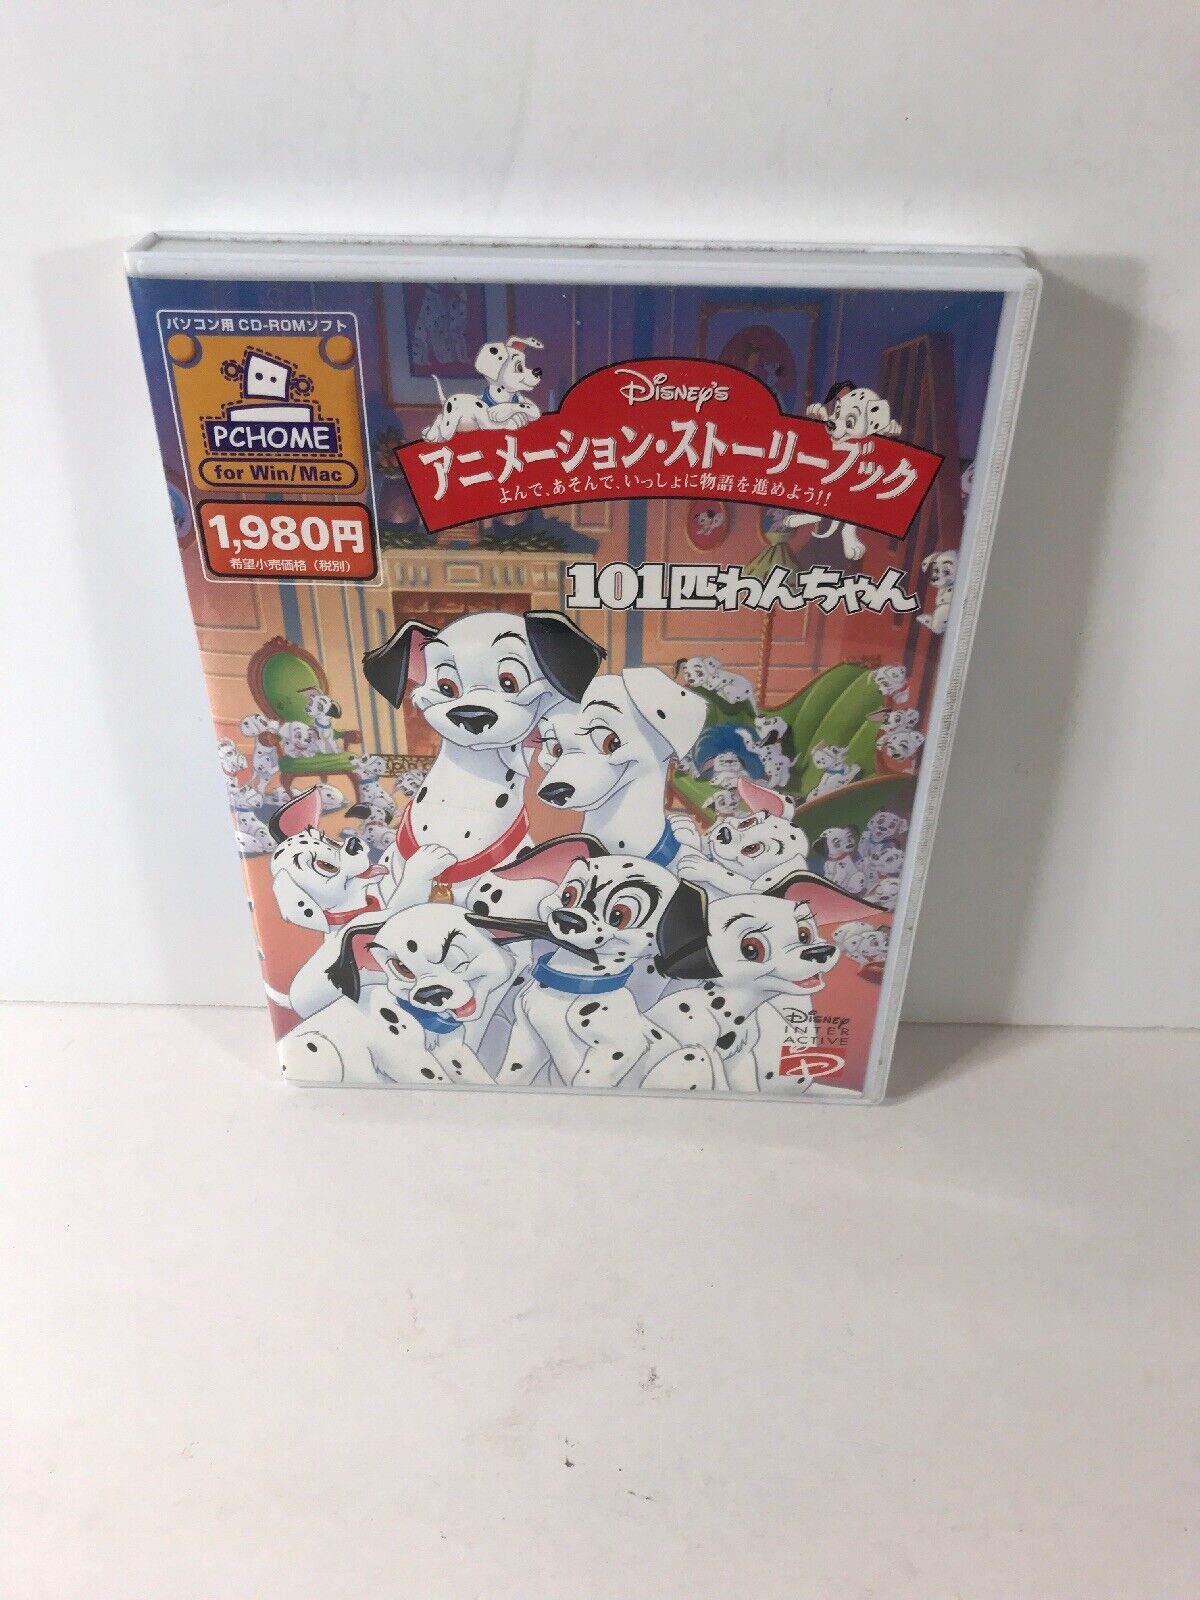 PC HOME-DISNEY 101 DALMATIANS ANIMATED STORYBOOK- JAPANESE SAMPLE- NOT TESTED